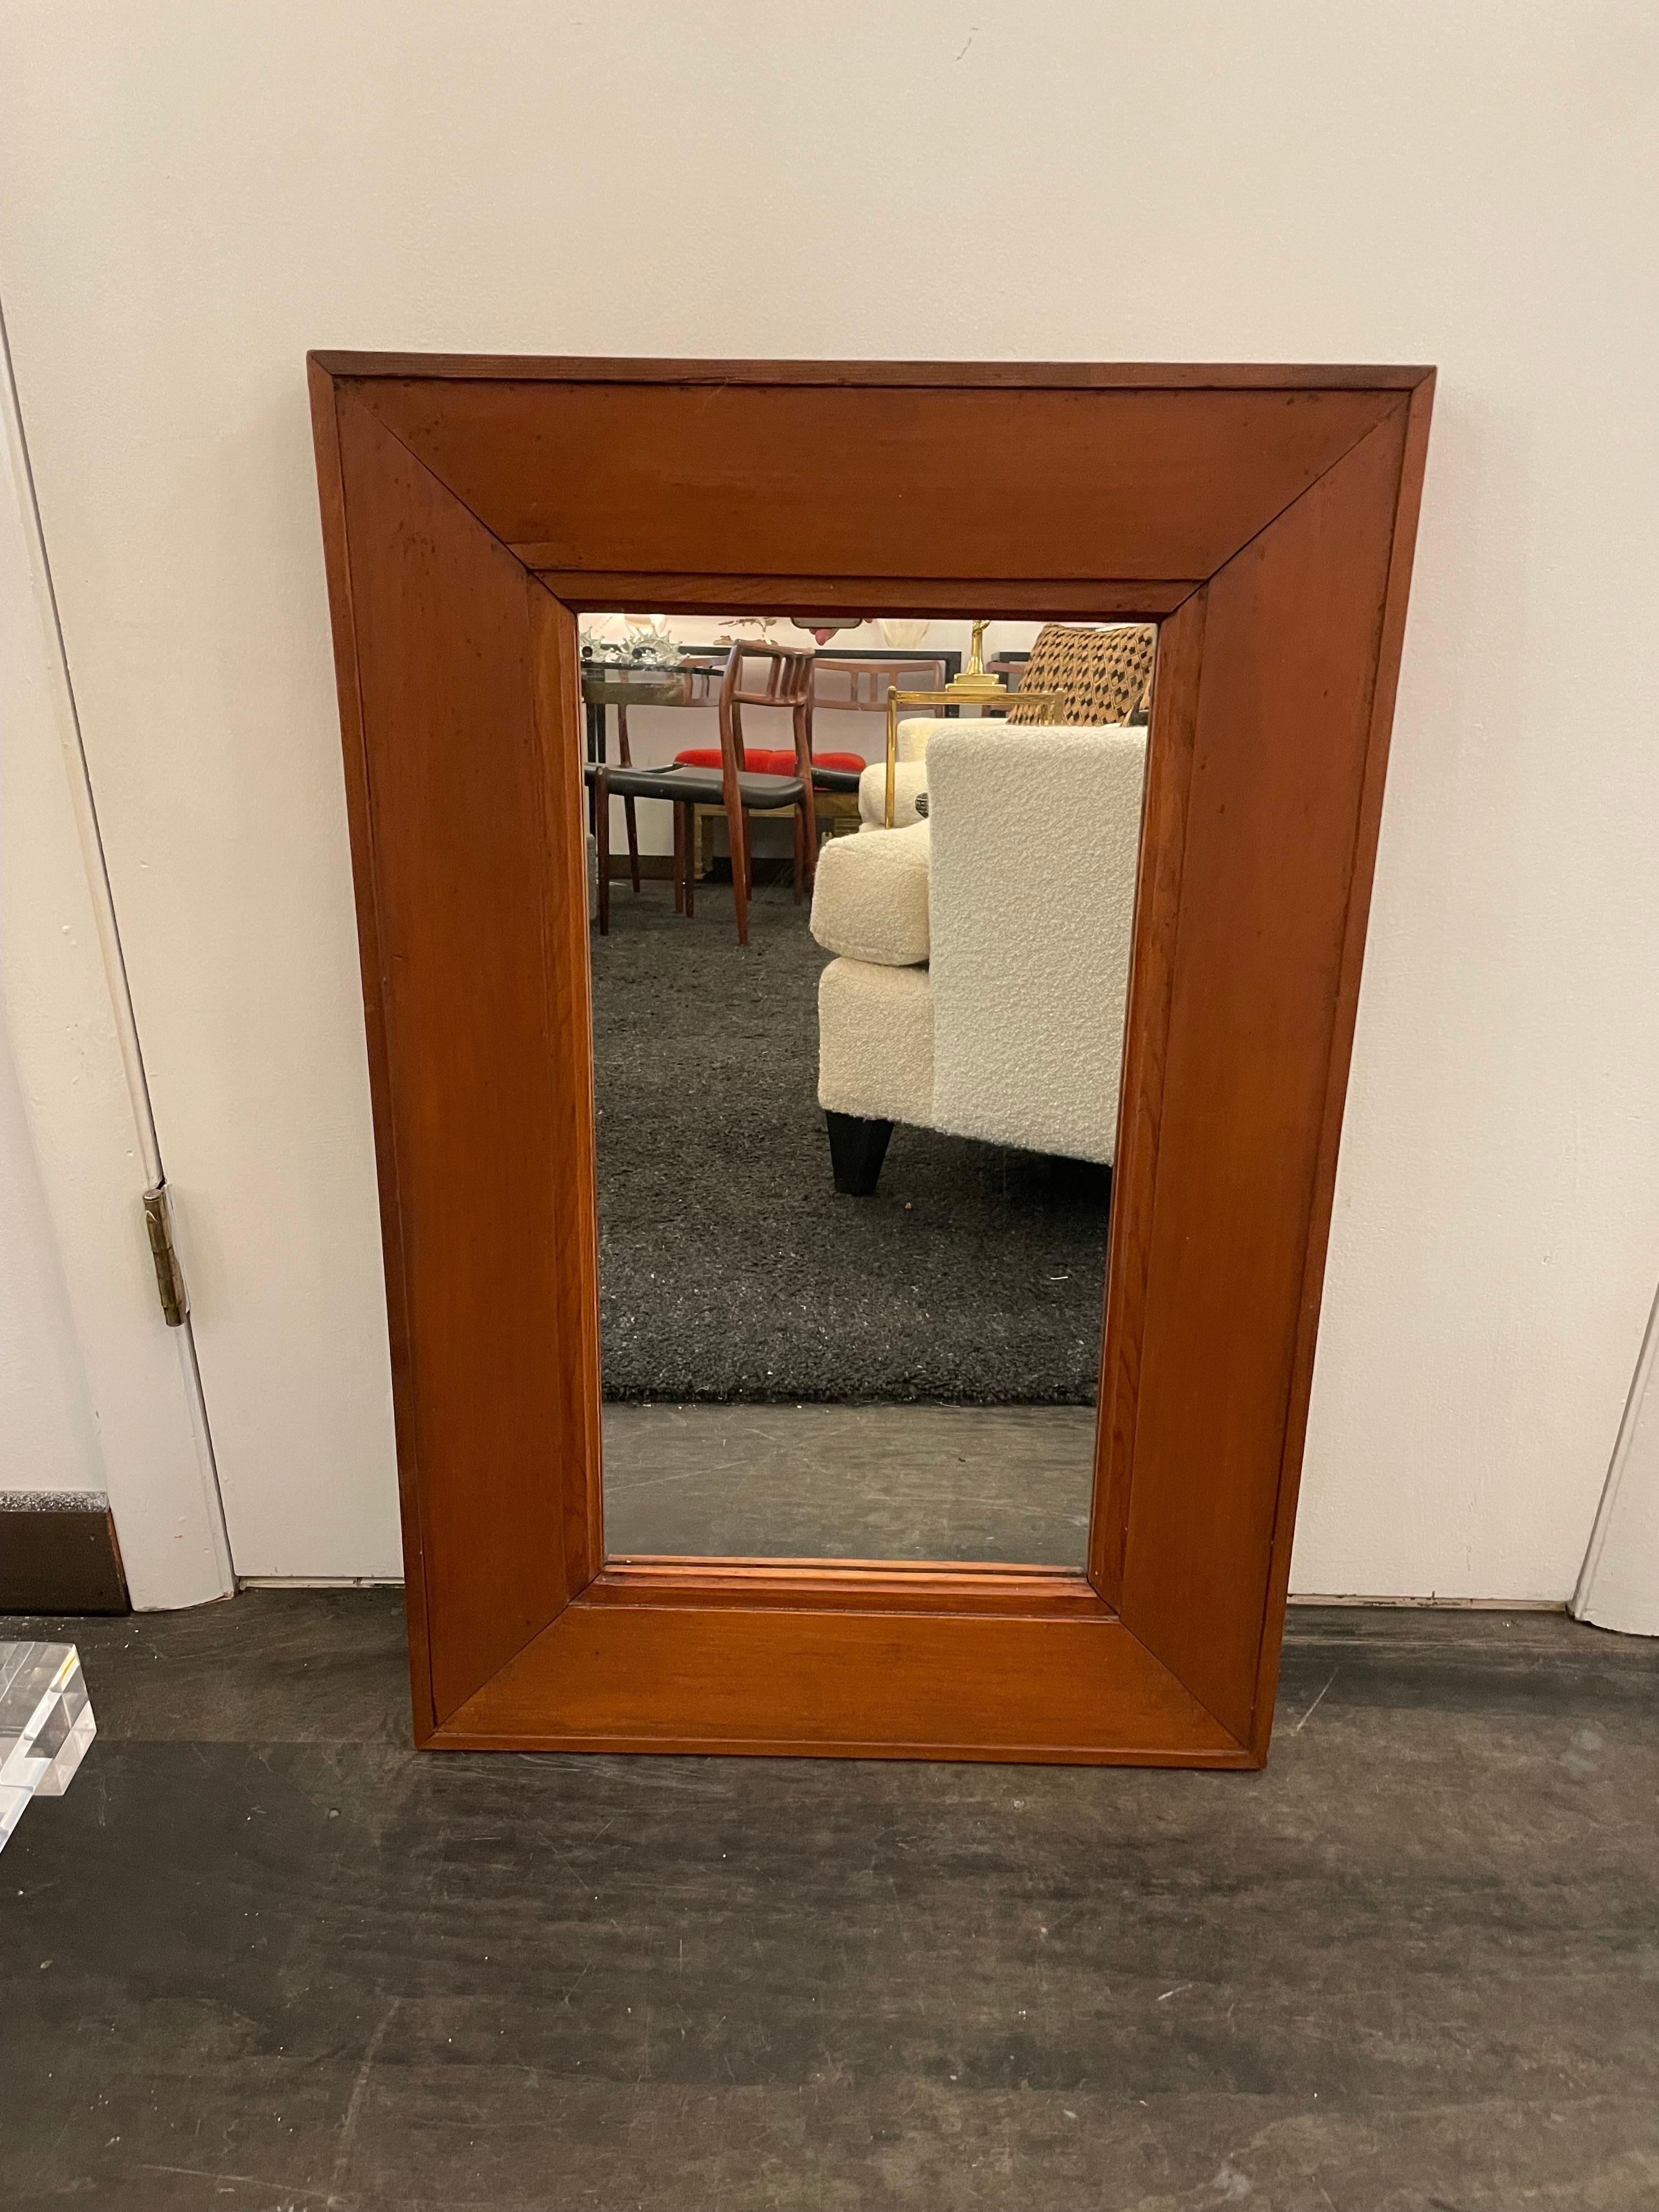 A simple and elegant Italian walnut wall mirror with a tiered wood frame. ALL original and in wonderful aged condition.